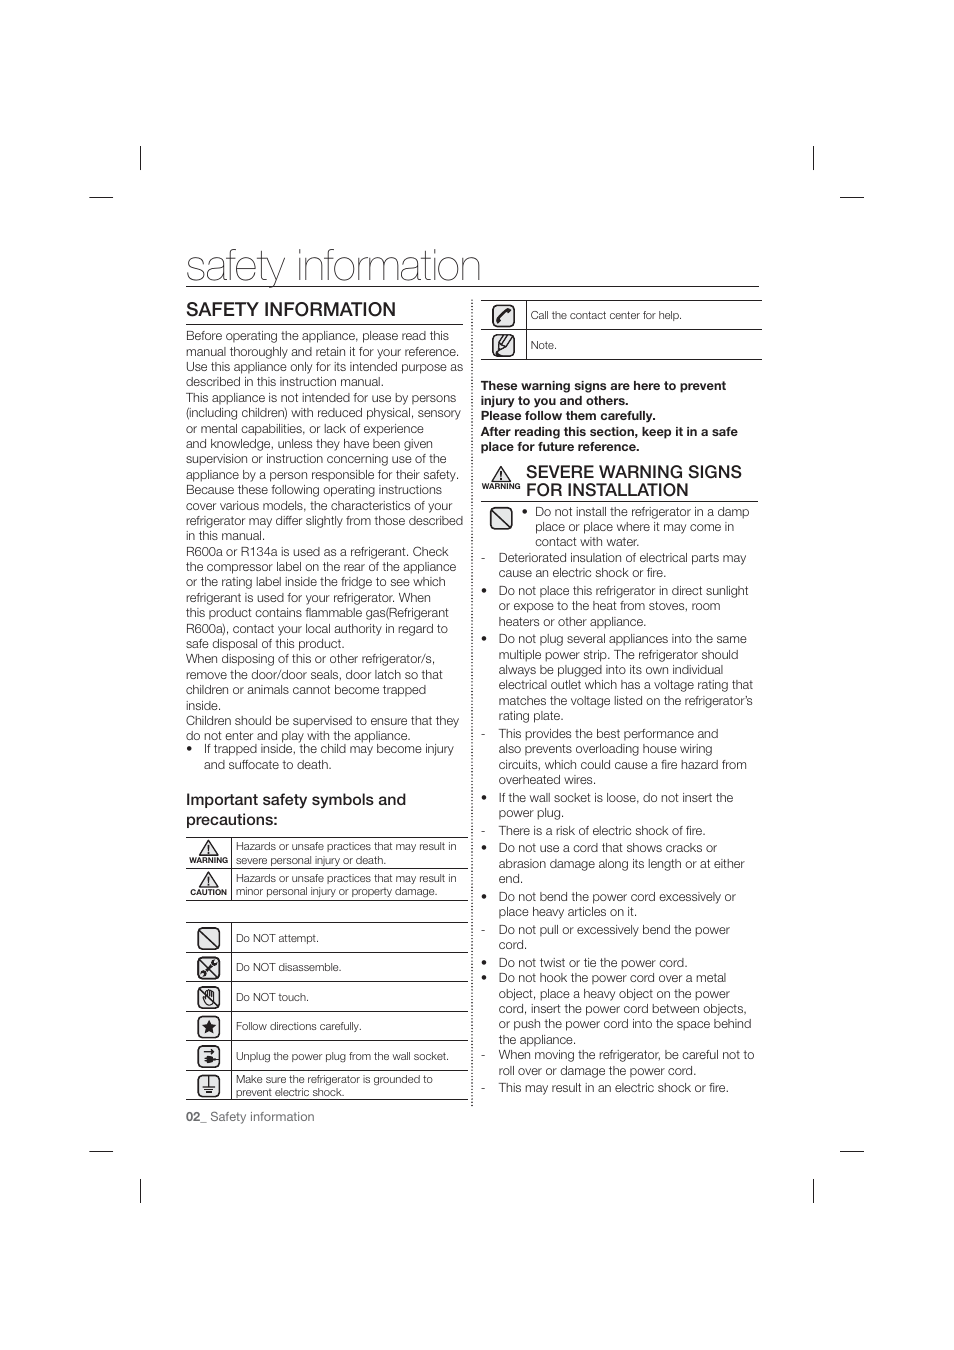 Safety information, Severe warning signs for installation, Important